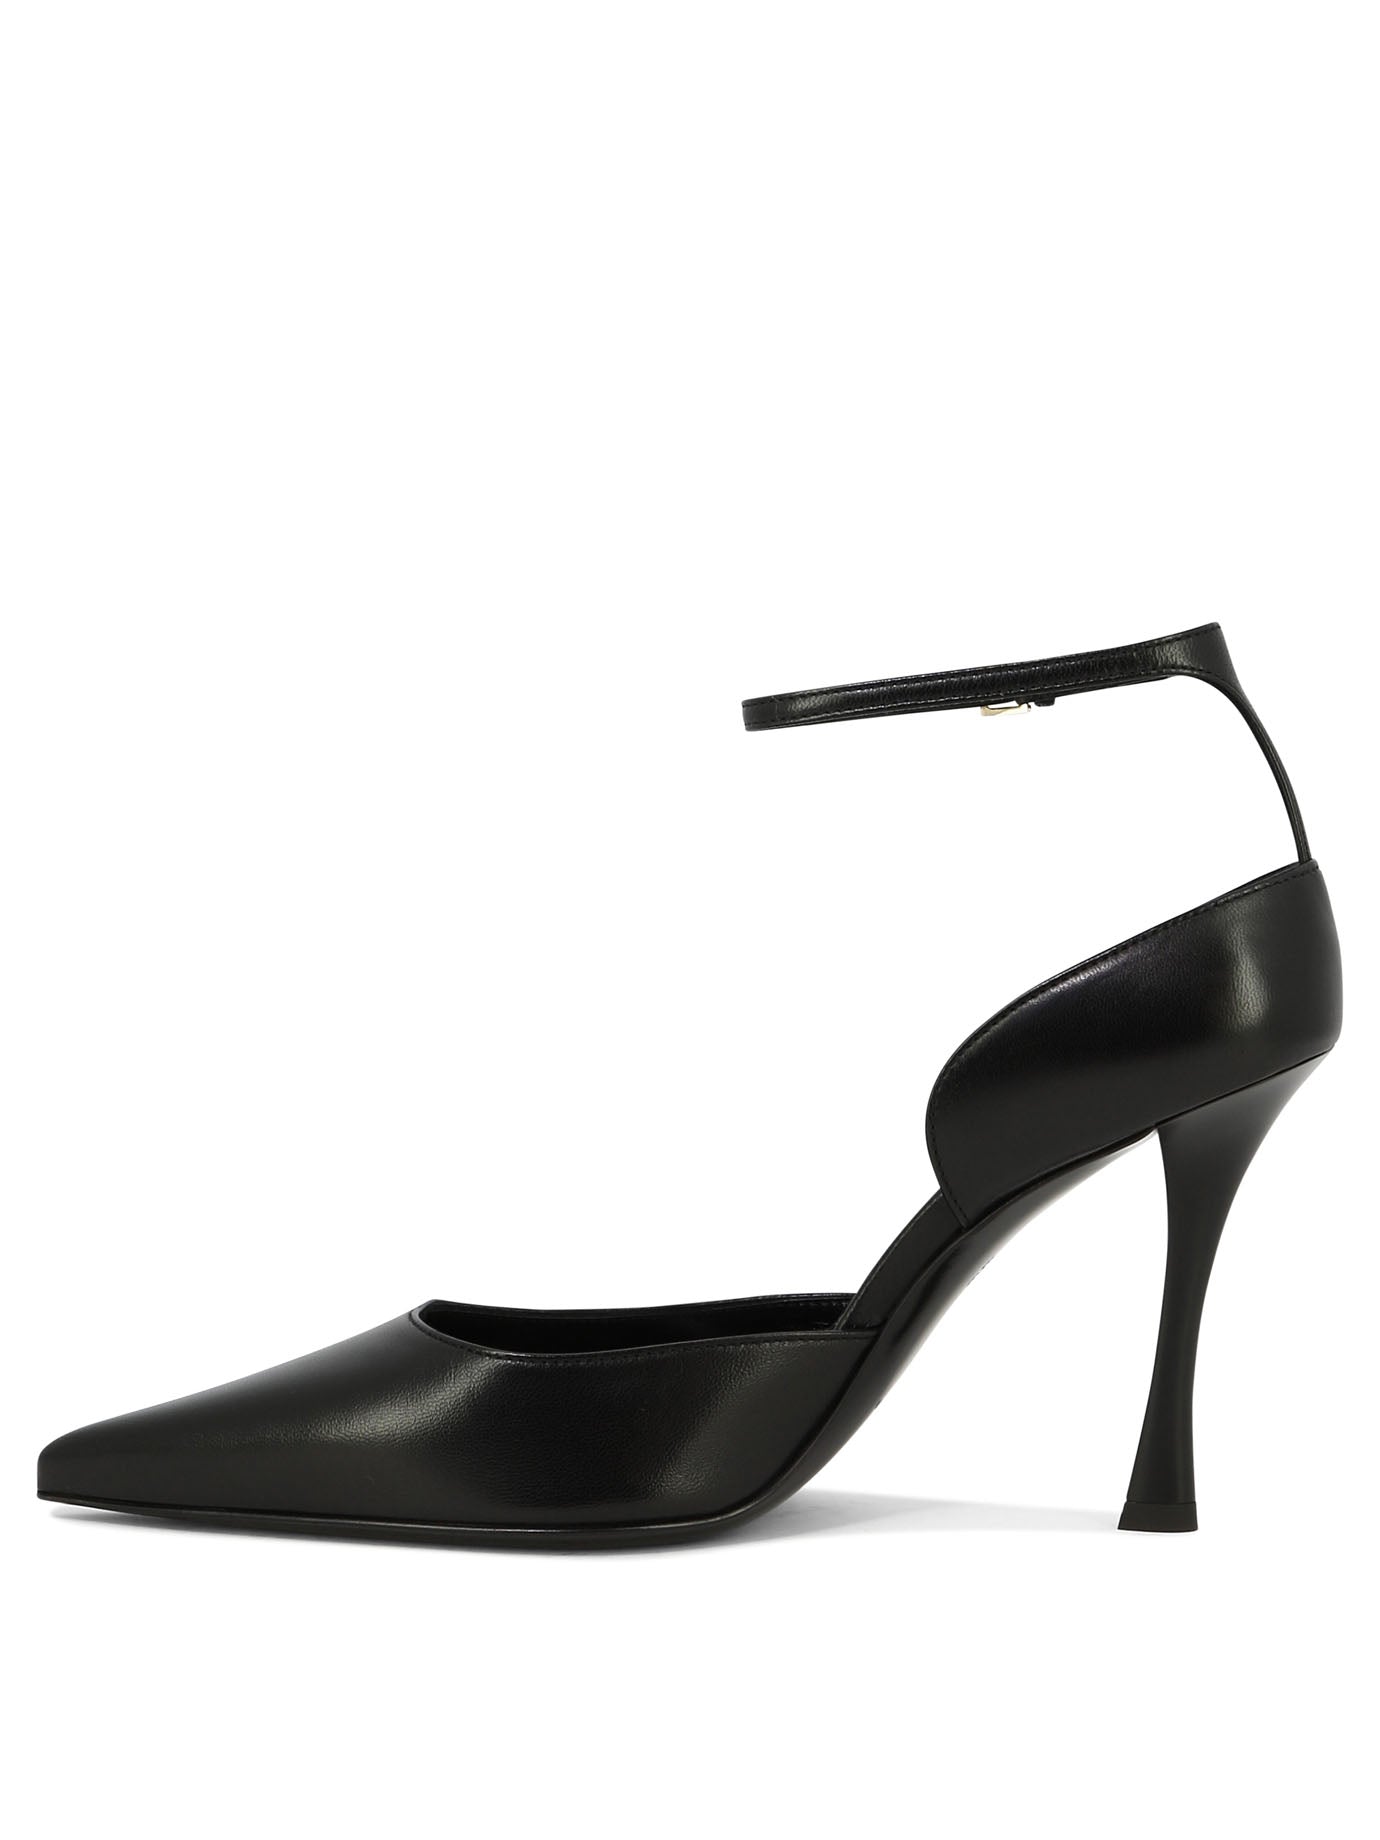 Shop Givenchy "show Stocking" Pumps